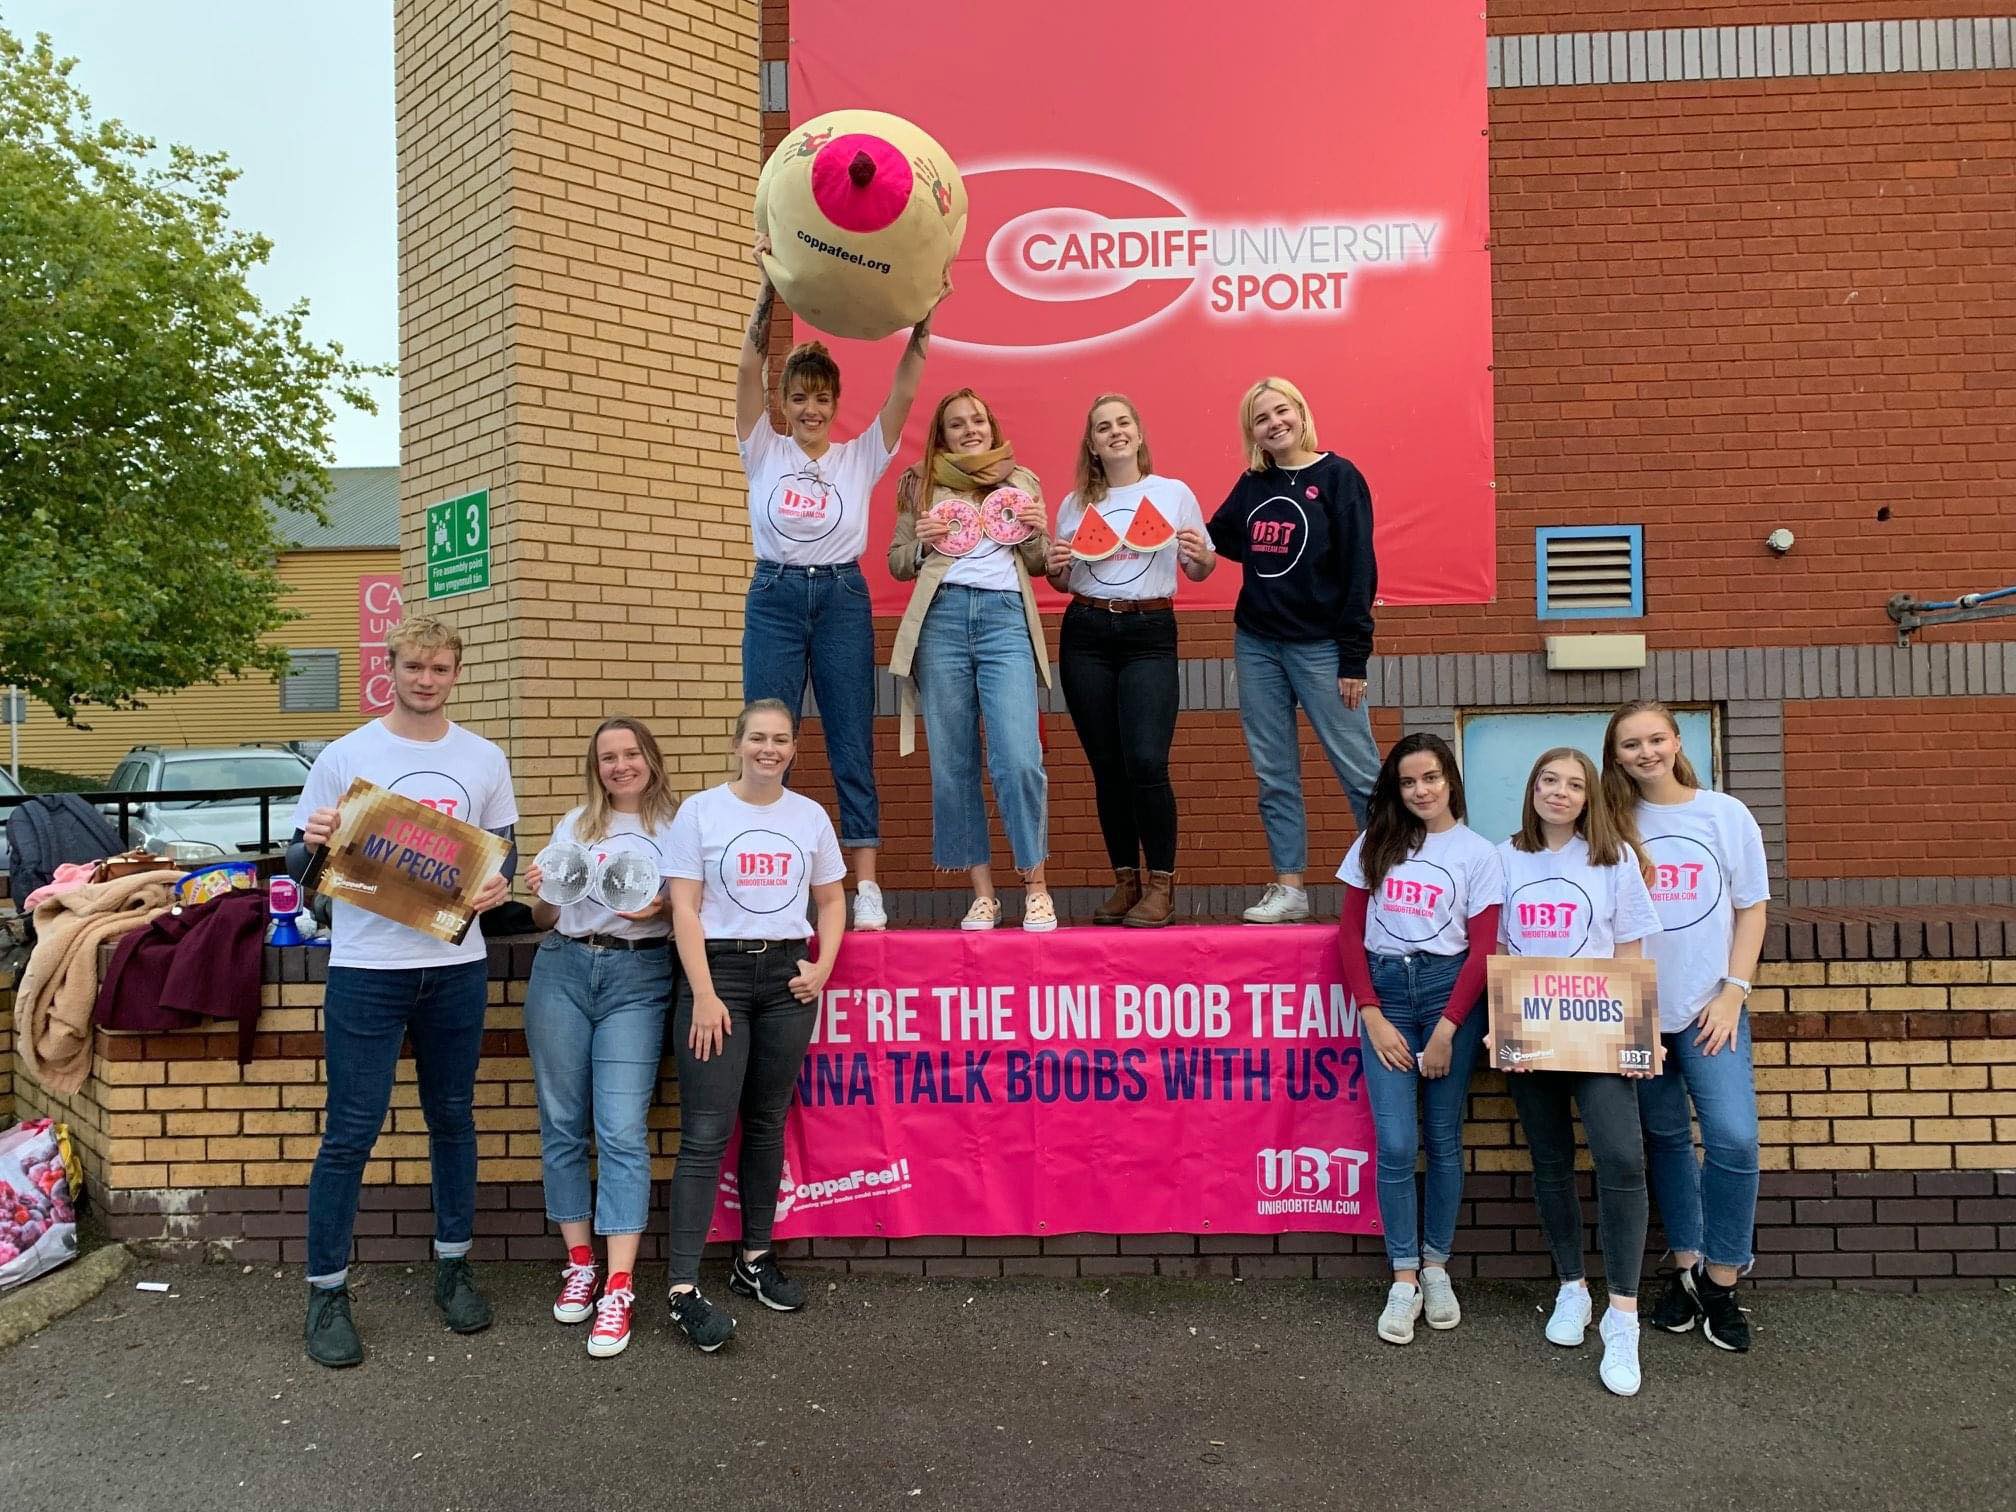 Cardiff students join running competition to help spread breast cancer  awareness - The Cardiffian